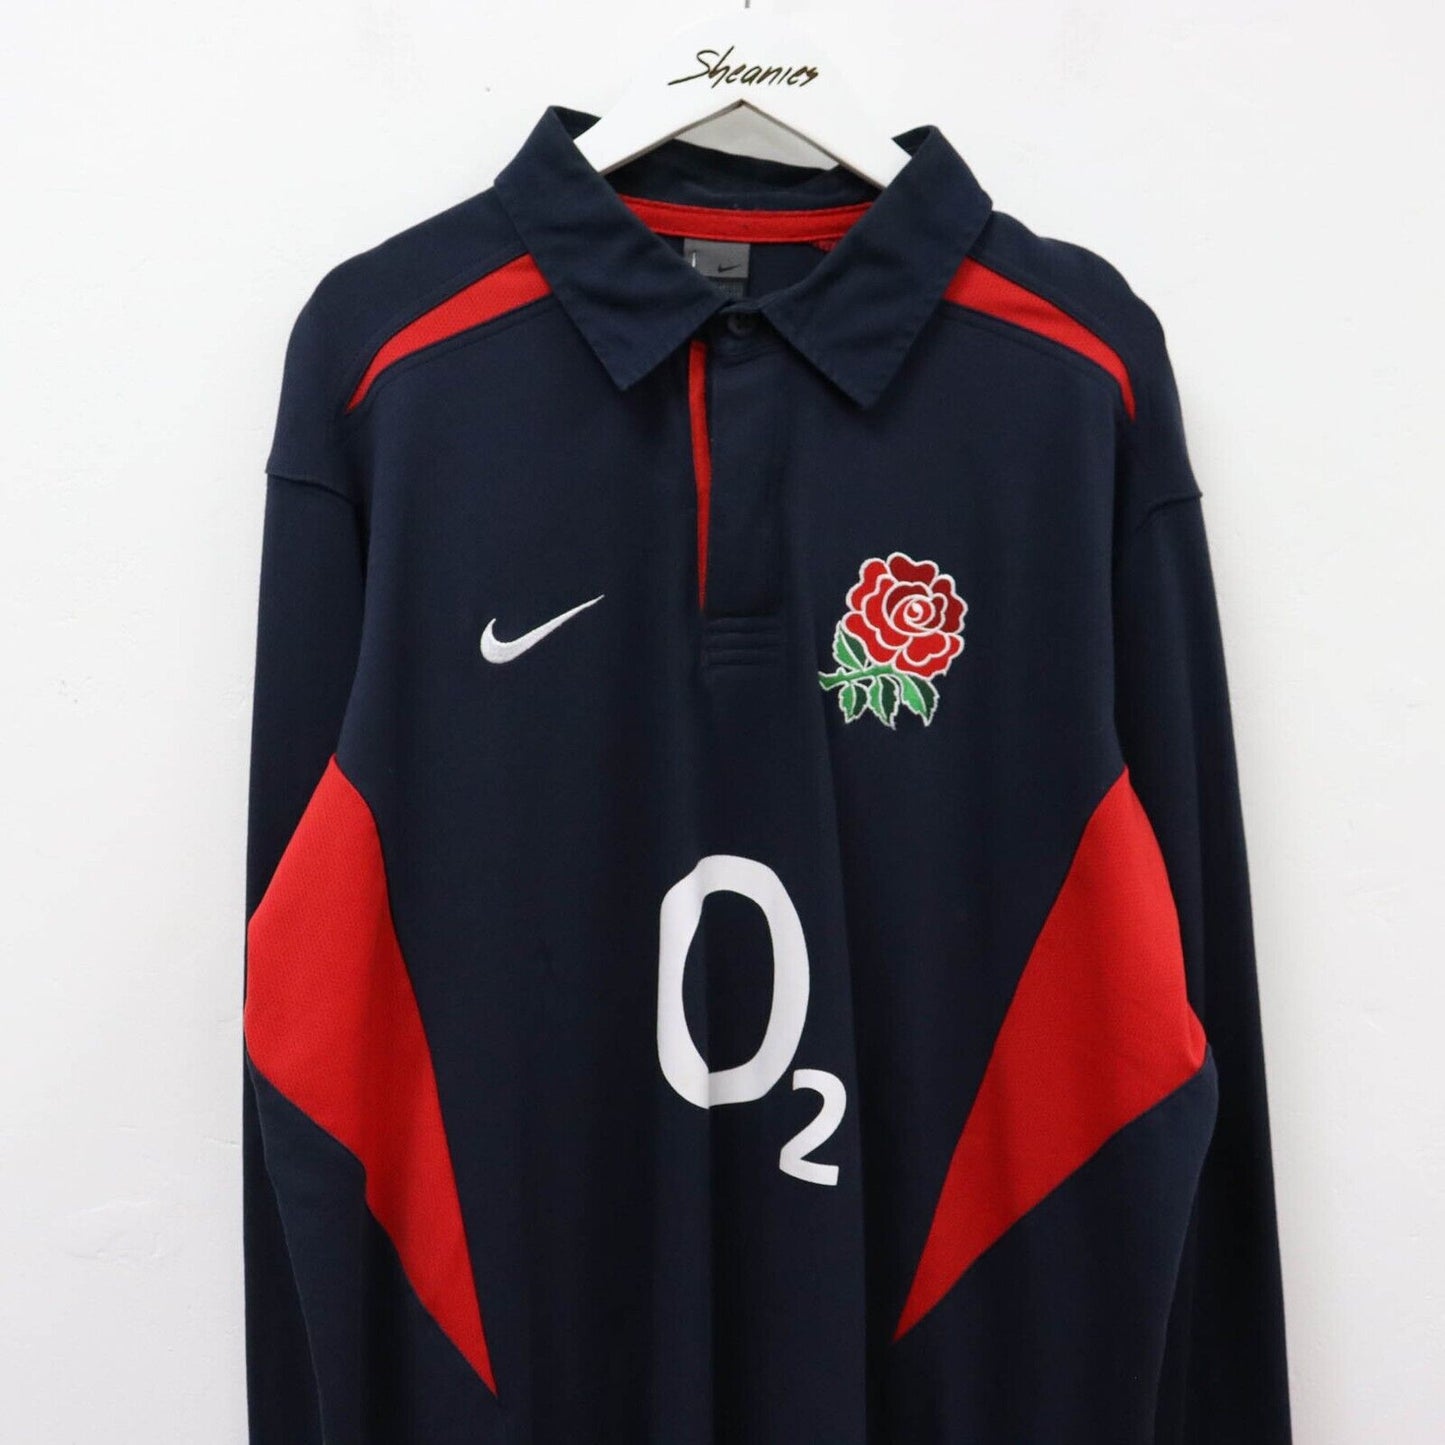 00s Nike England Rugby Shirt Size XL